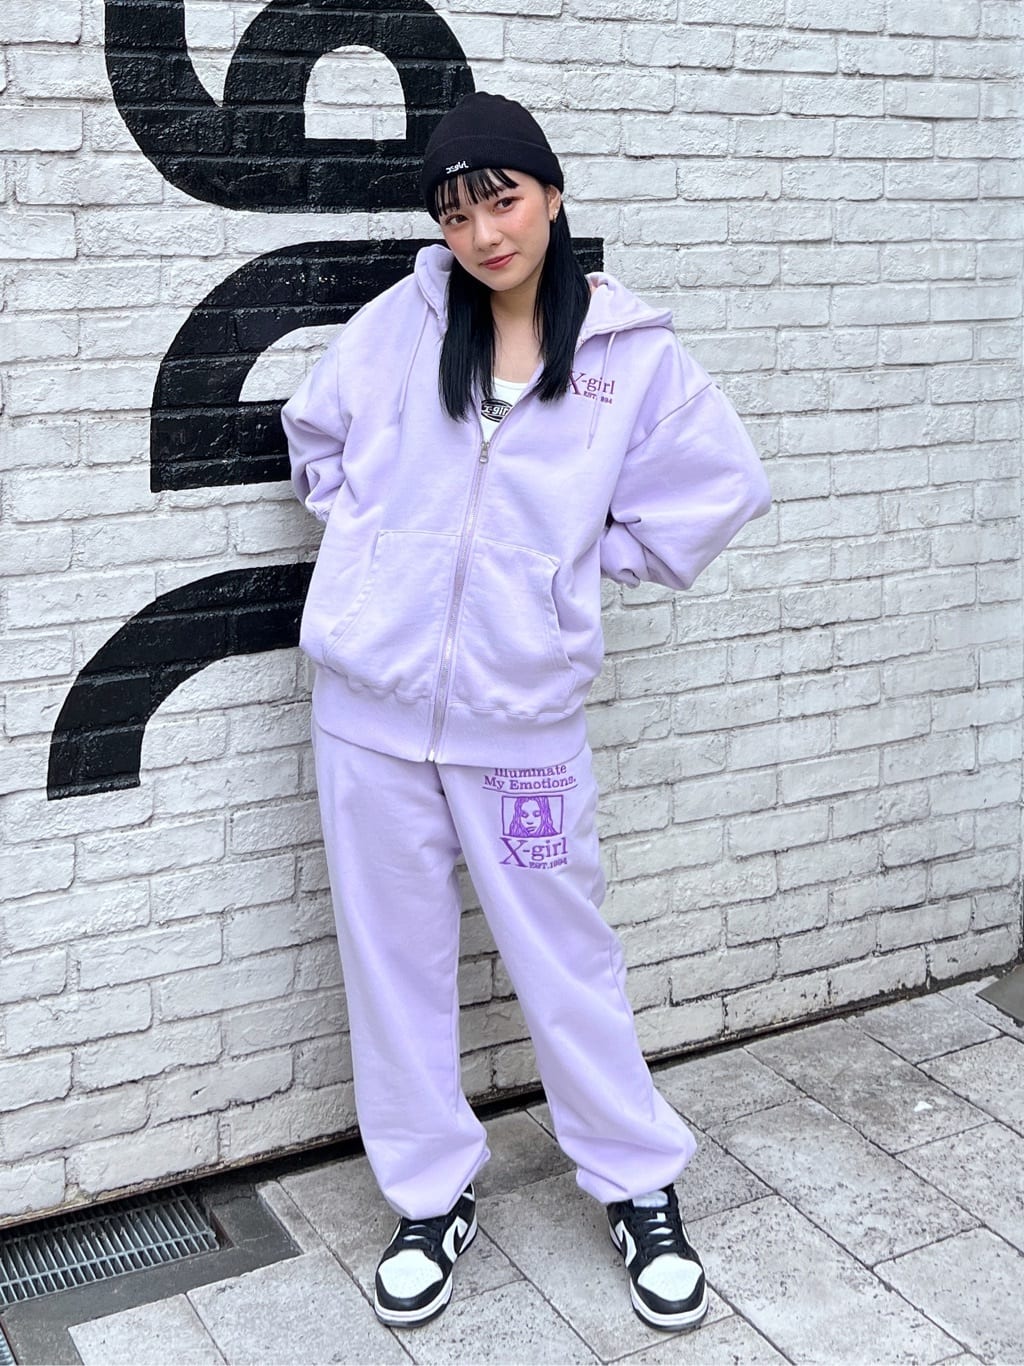 X-girlのMY EMOTIONS ZIP UP SWEAT HOODIE パーカー X-girlを使った